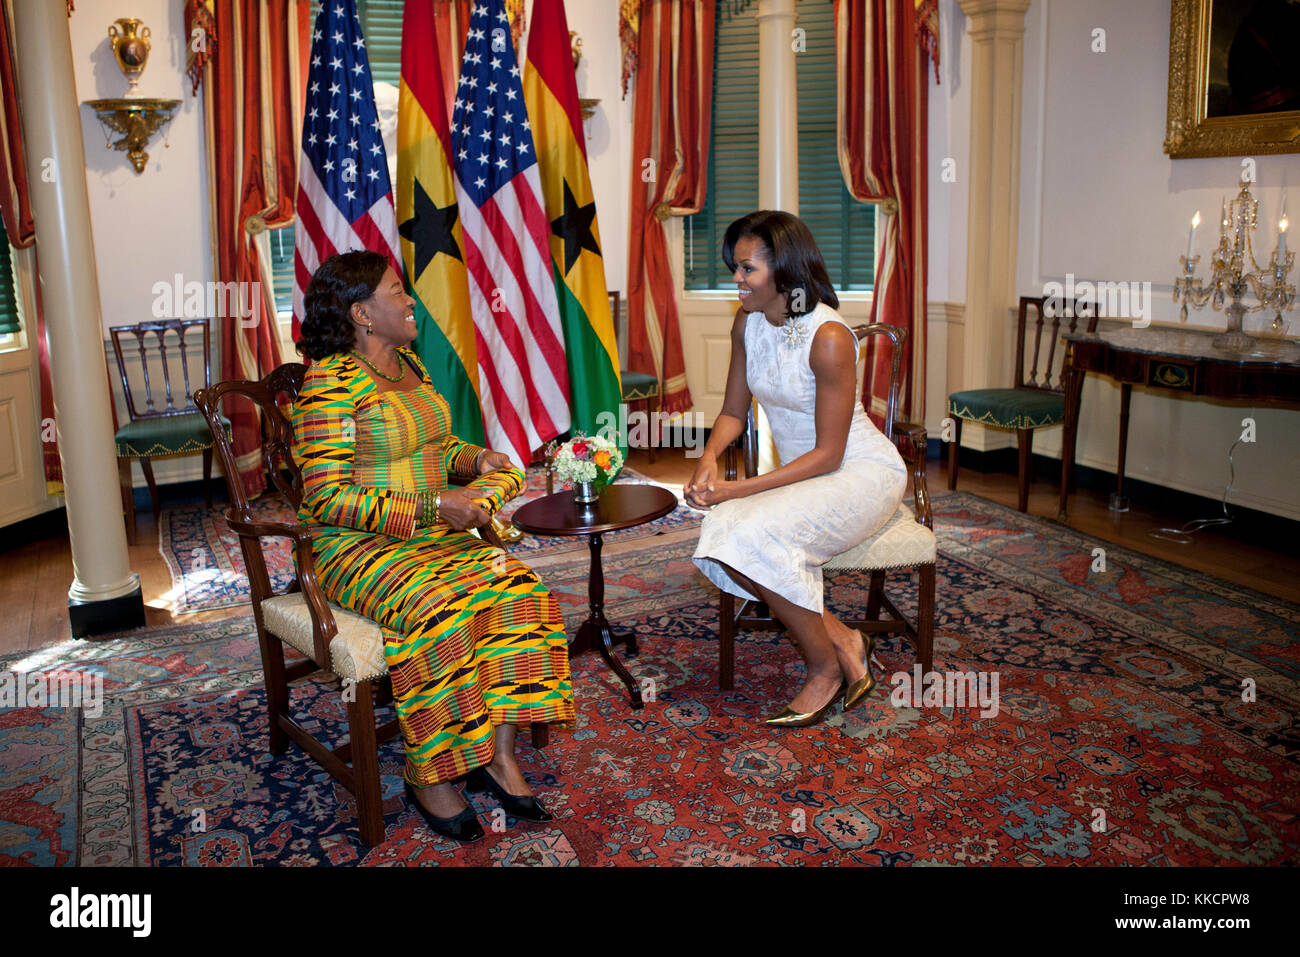 First Lady Michelle Obama meets with Ernestina Mills, First Lady of Ghana, at the State Department in Washington, D.C., March 8, 2012. Stock Photo